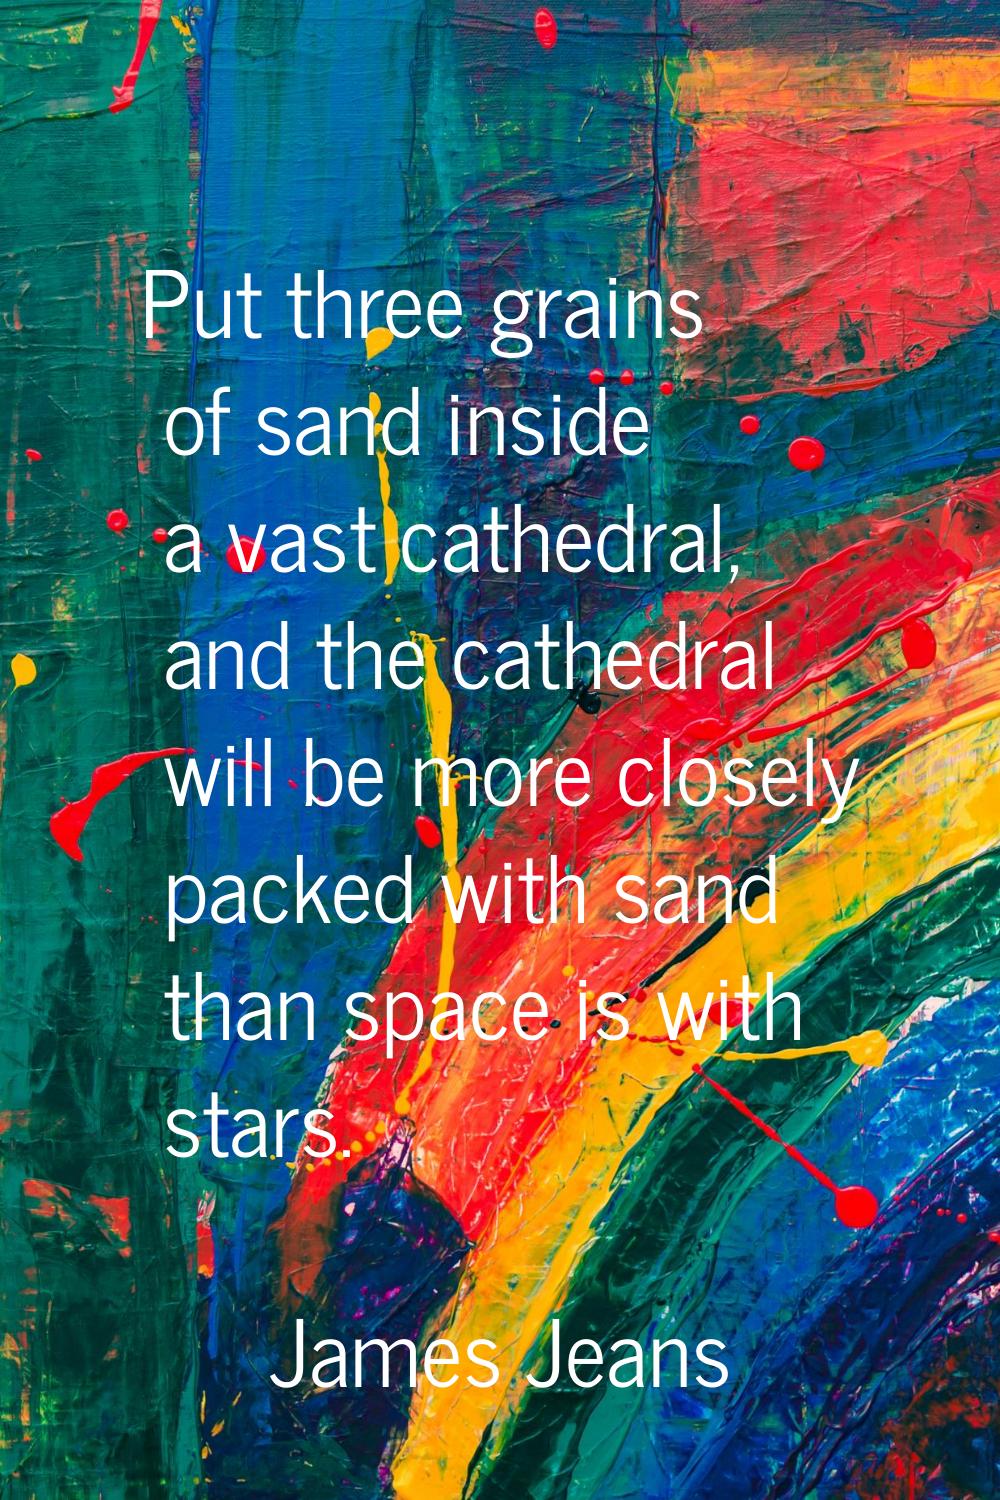 Put three grains of sand inside a vast cathedral, and the cathedral will be more closely packed wit